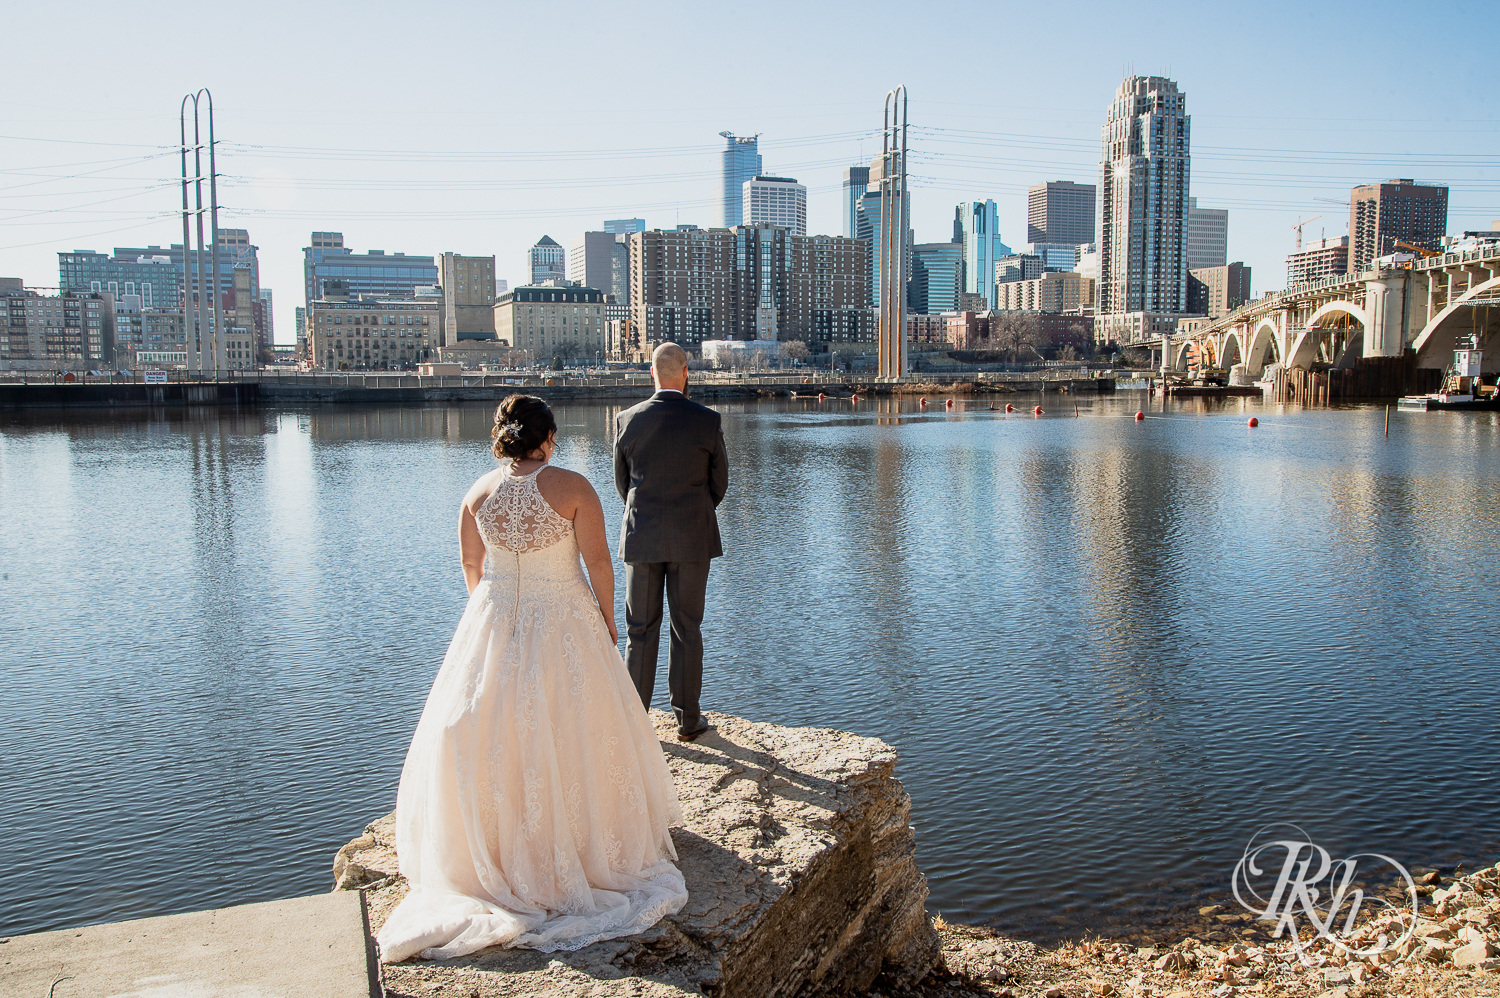 Bride and groom share first look at in front of river in Saint Anthony Main in Minneapolis, Minnesota.